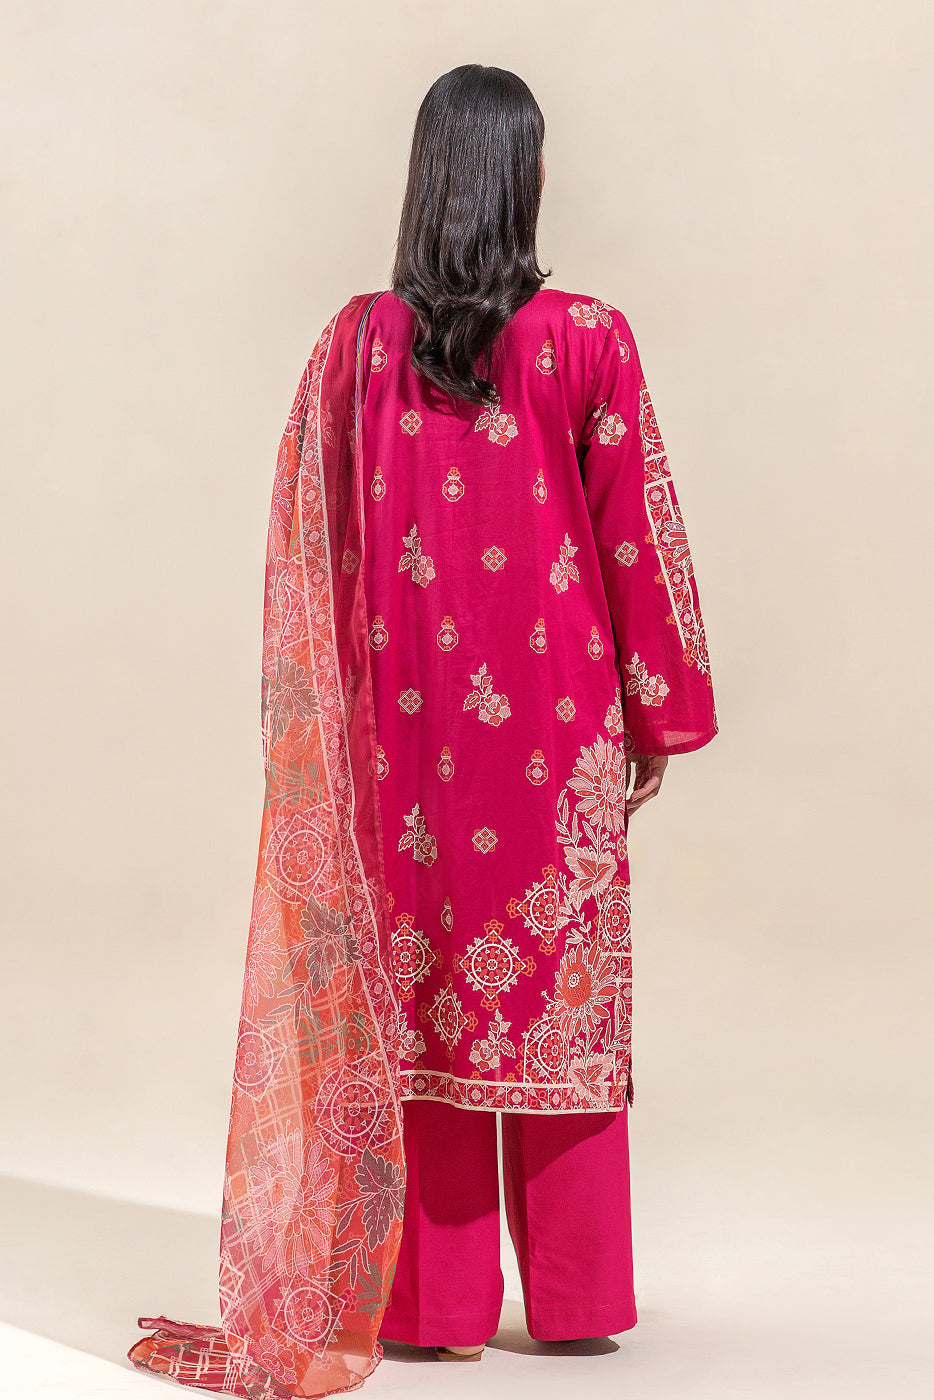 3 PIECE EMBROIDERED LAWN SUIT-SCARLET STONE (UNSTITCHED)